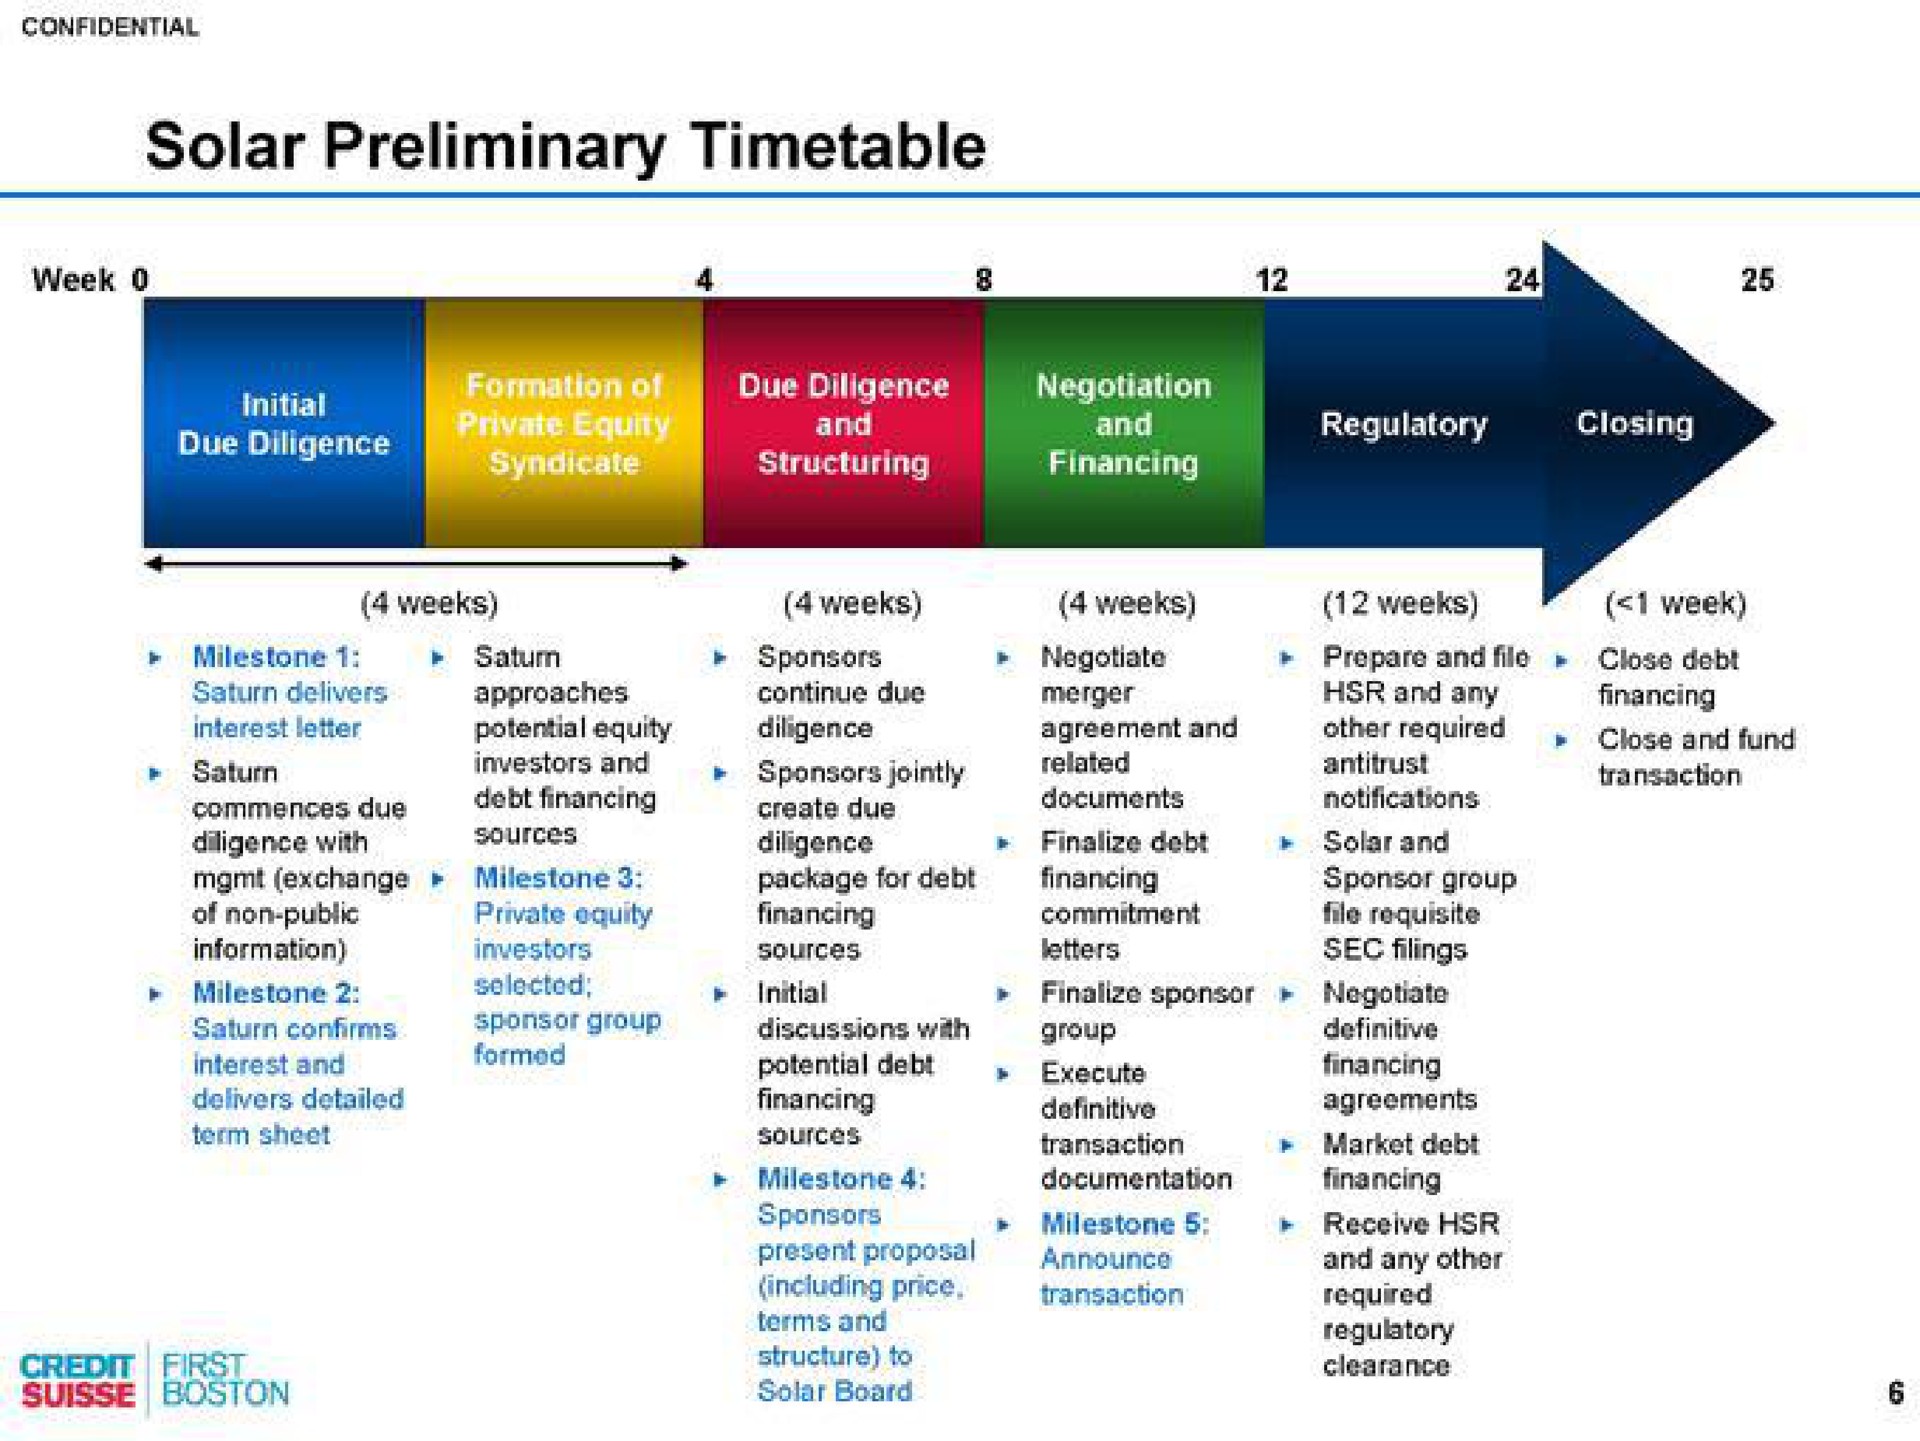 solar preliminary timetable | Credit Suisse